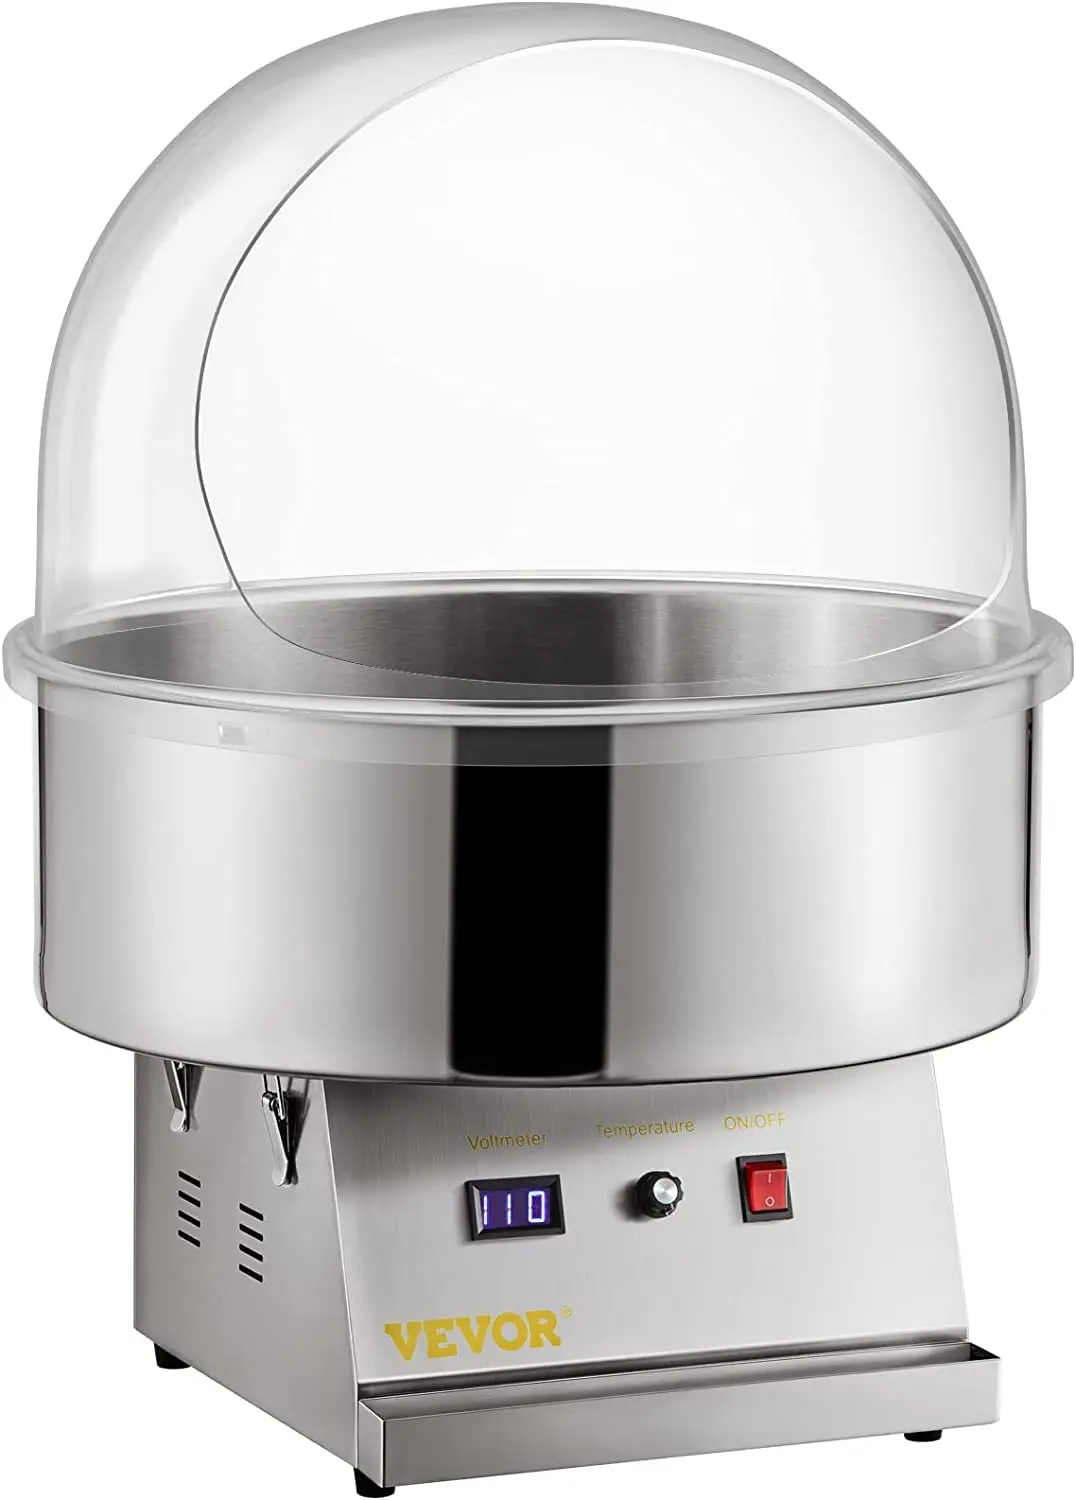 

Candy Machine with Bubble Cover Shield, Silver 1050W Commercial Cotton Candy Maker Stainless Steel for Various Parties